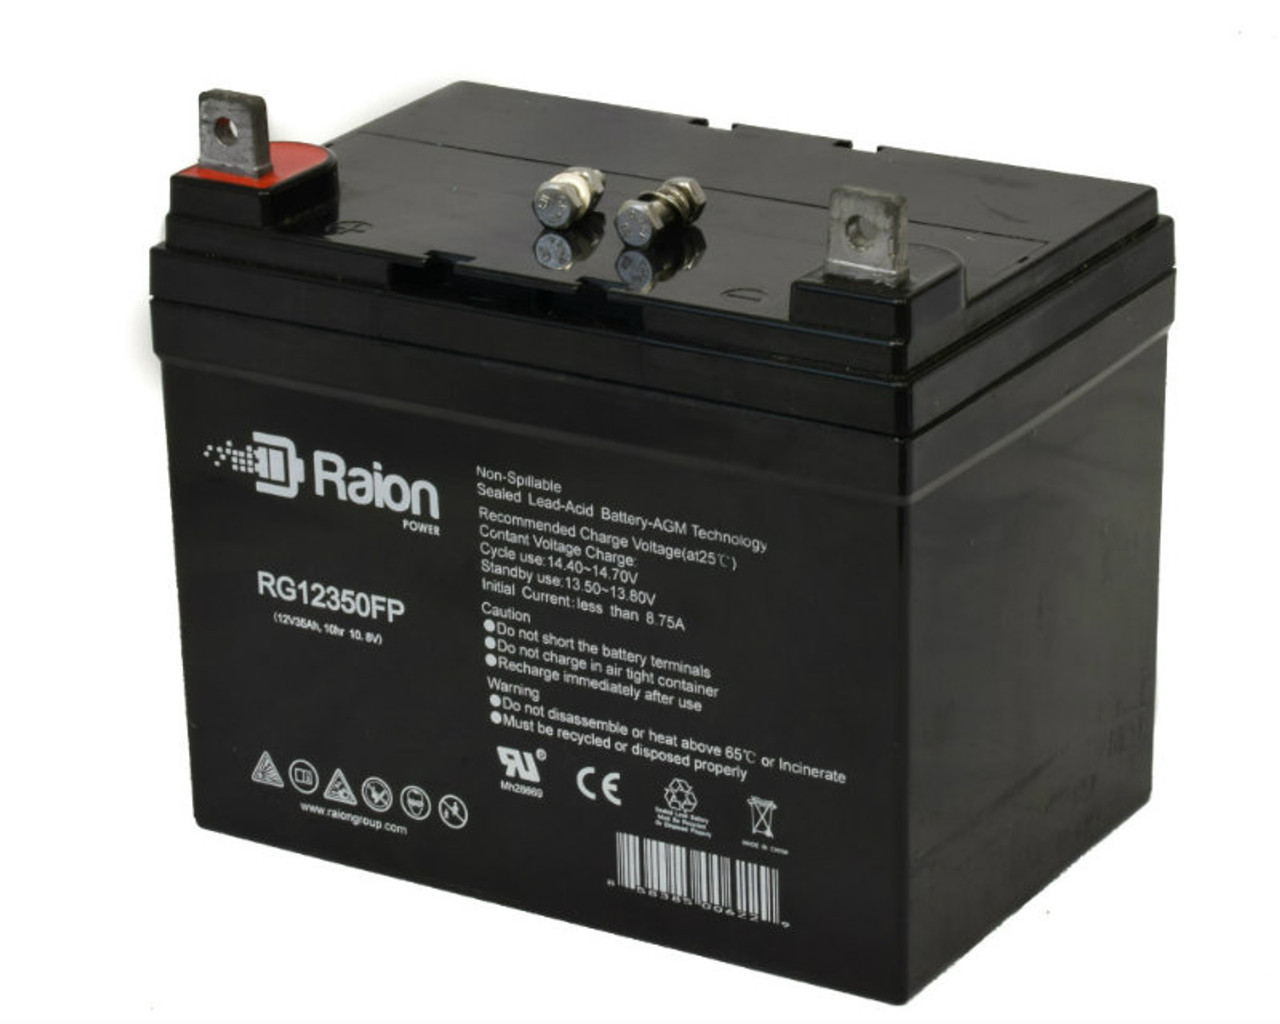 Raion Power Replacement 12V 35Ah RG12350FP Battery for CSPower CS12-33